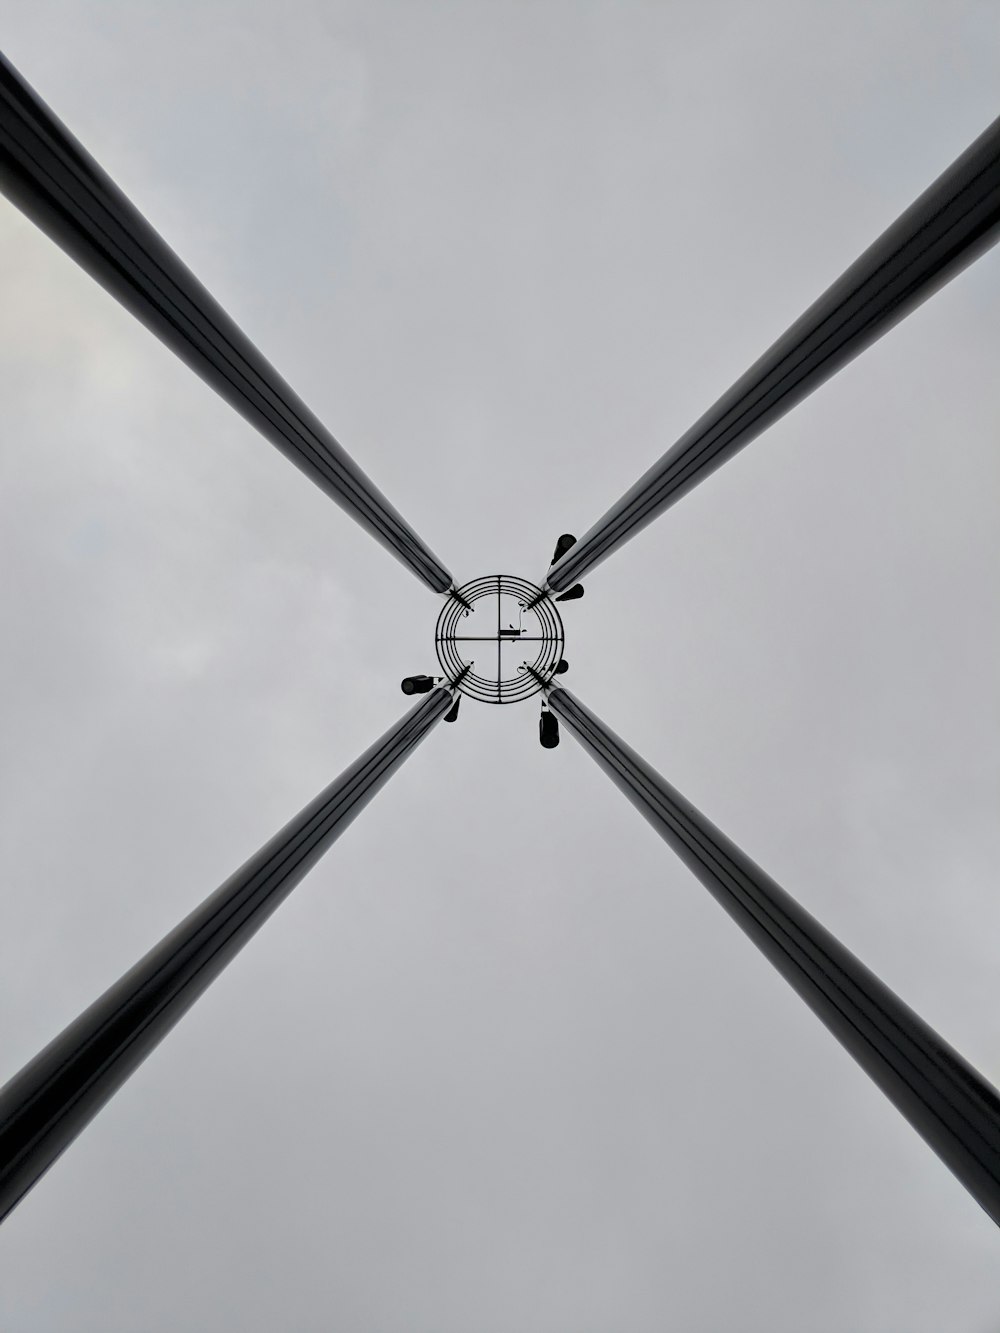 a group of black and white poles with a sky background